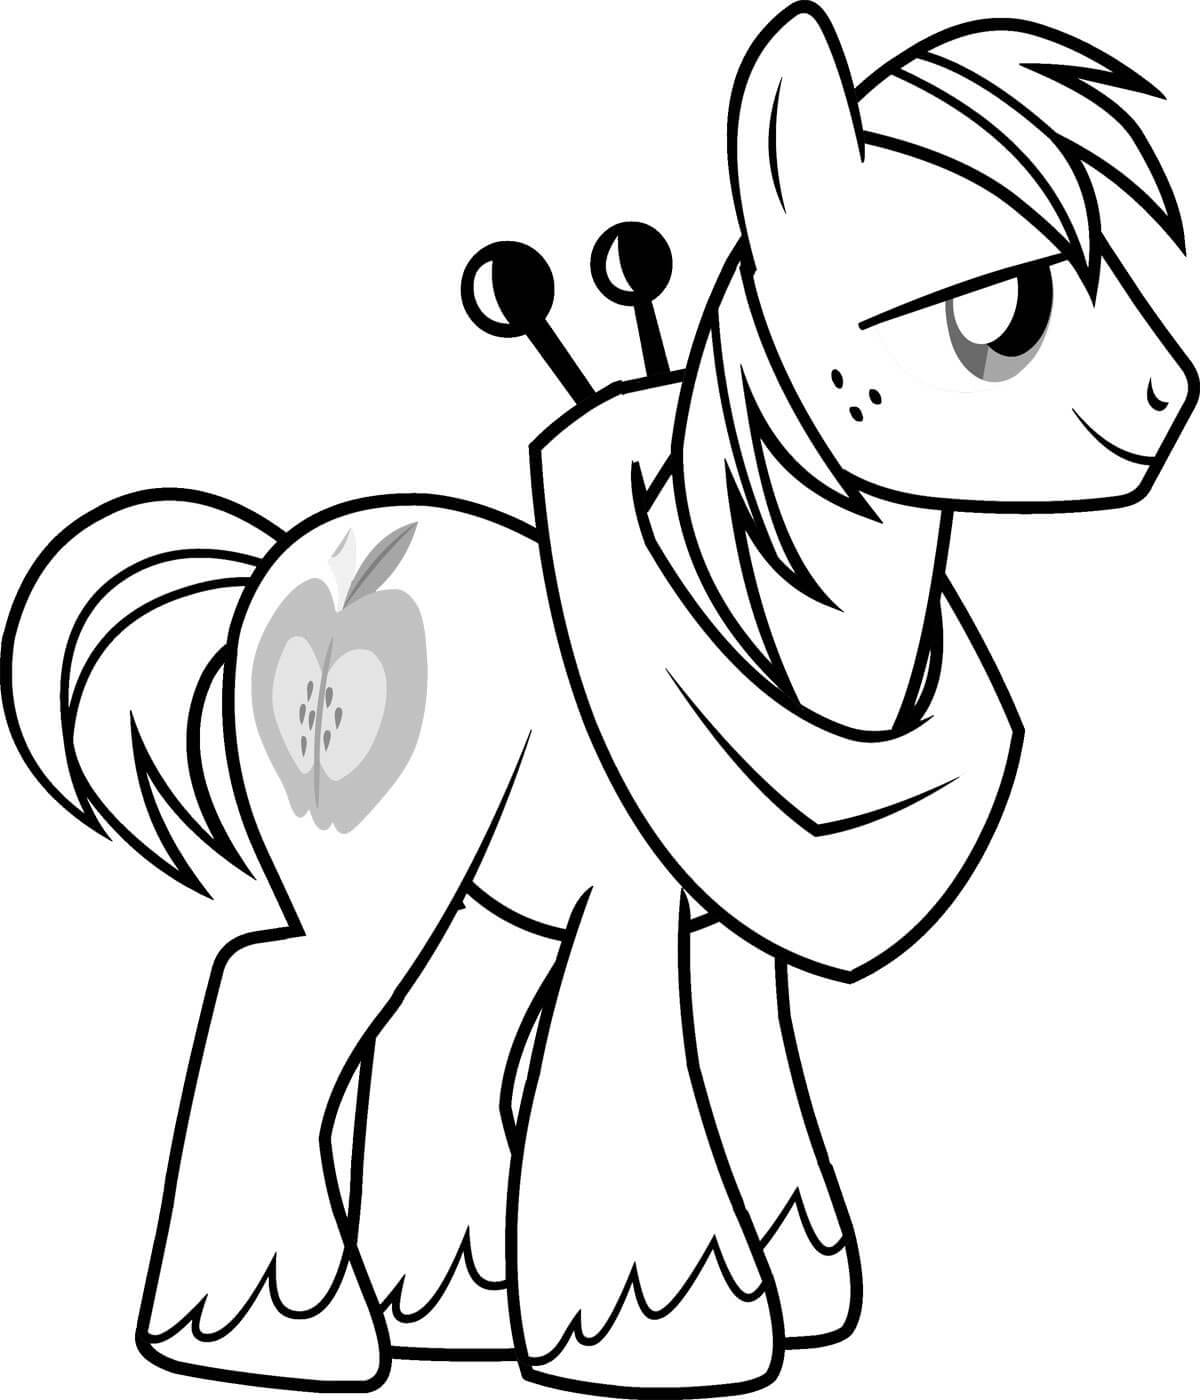 40 little pony coloring pages by happy chi